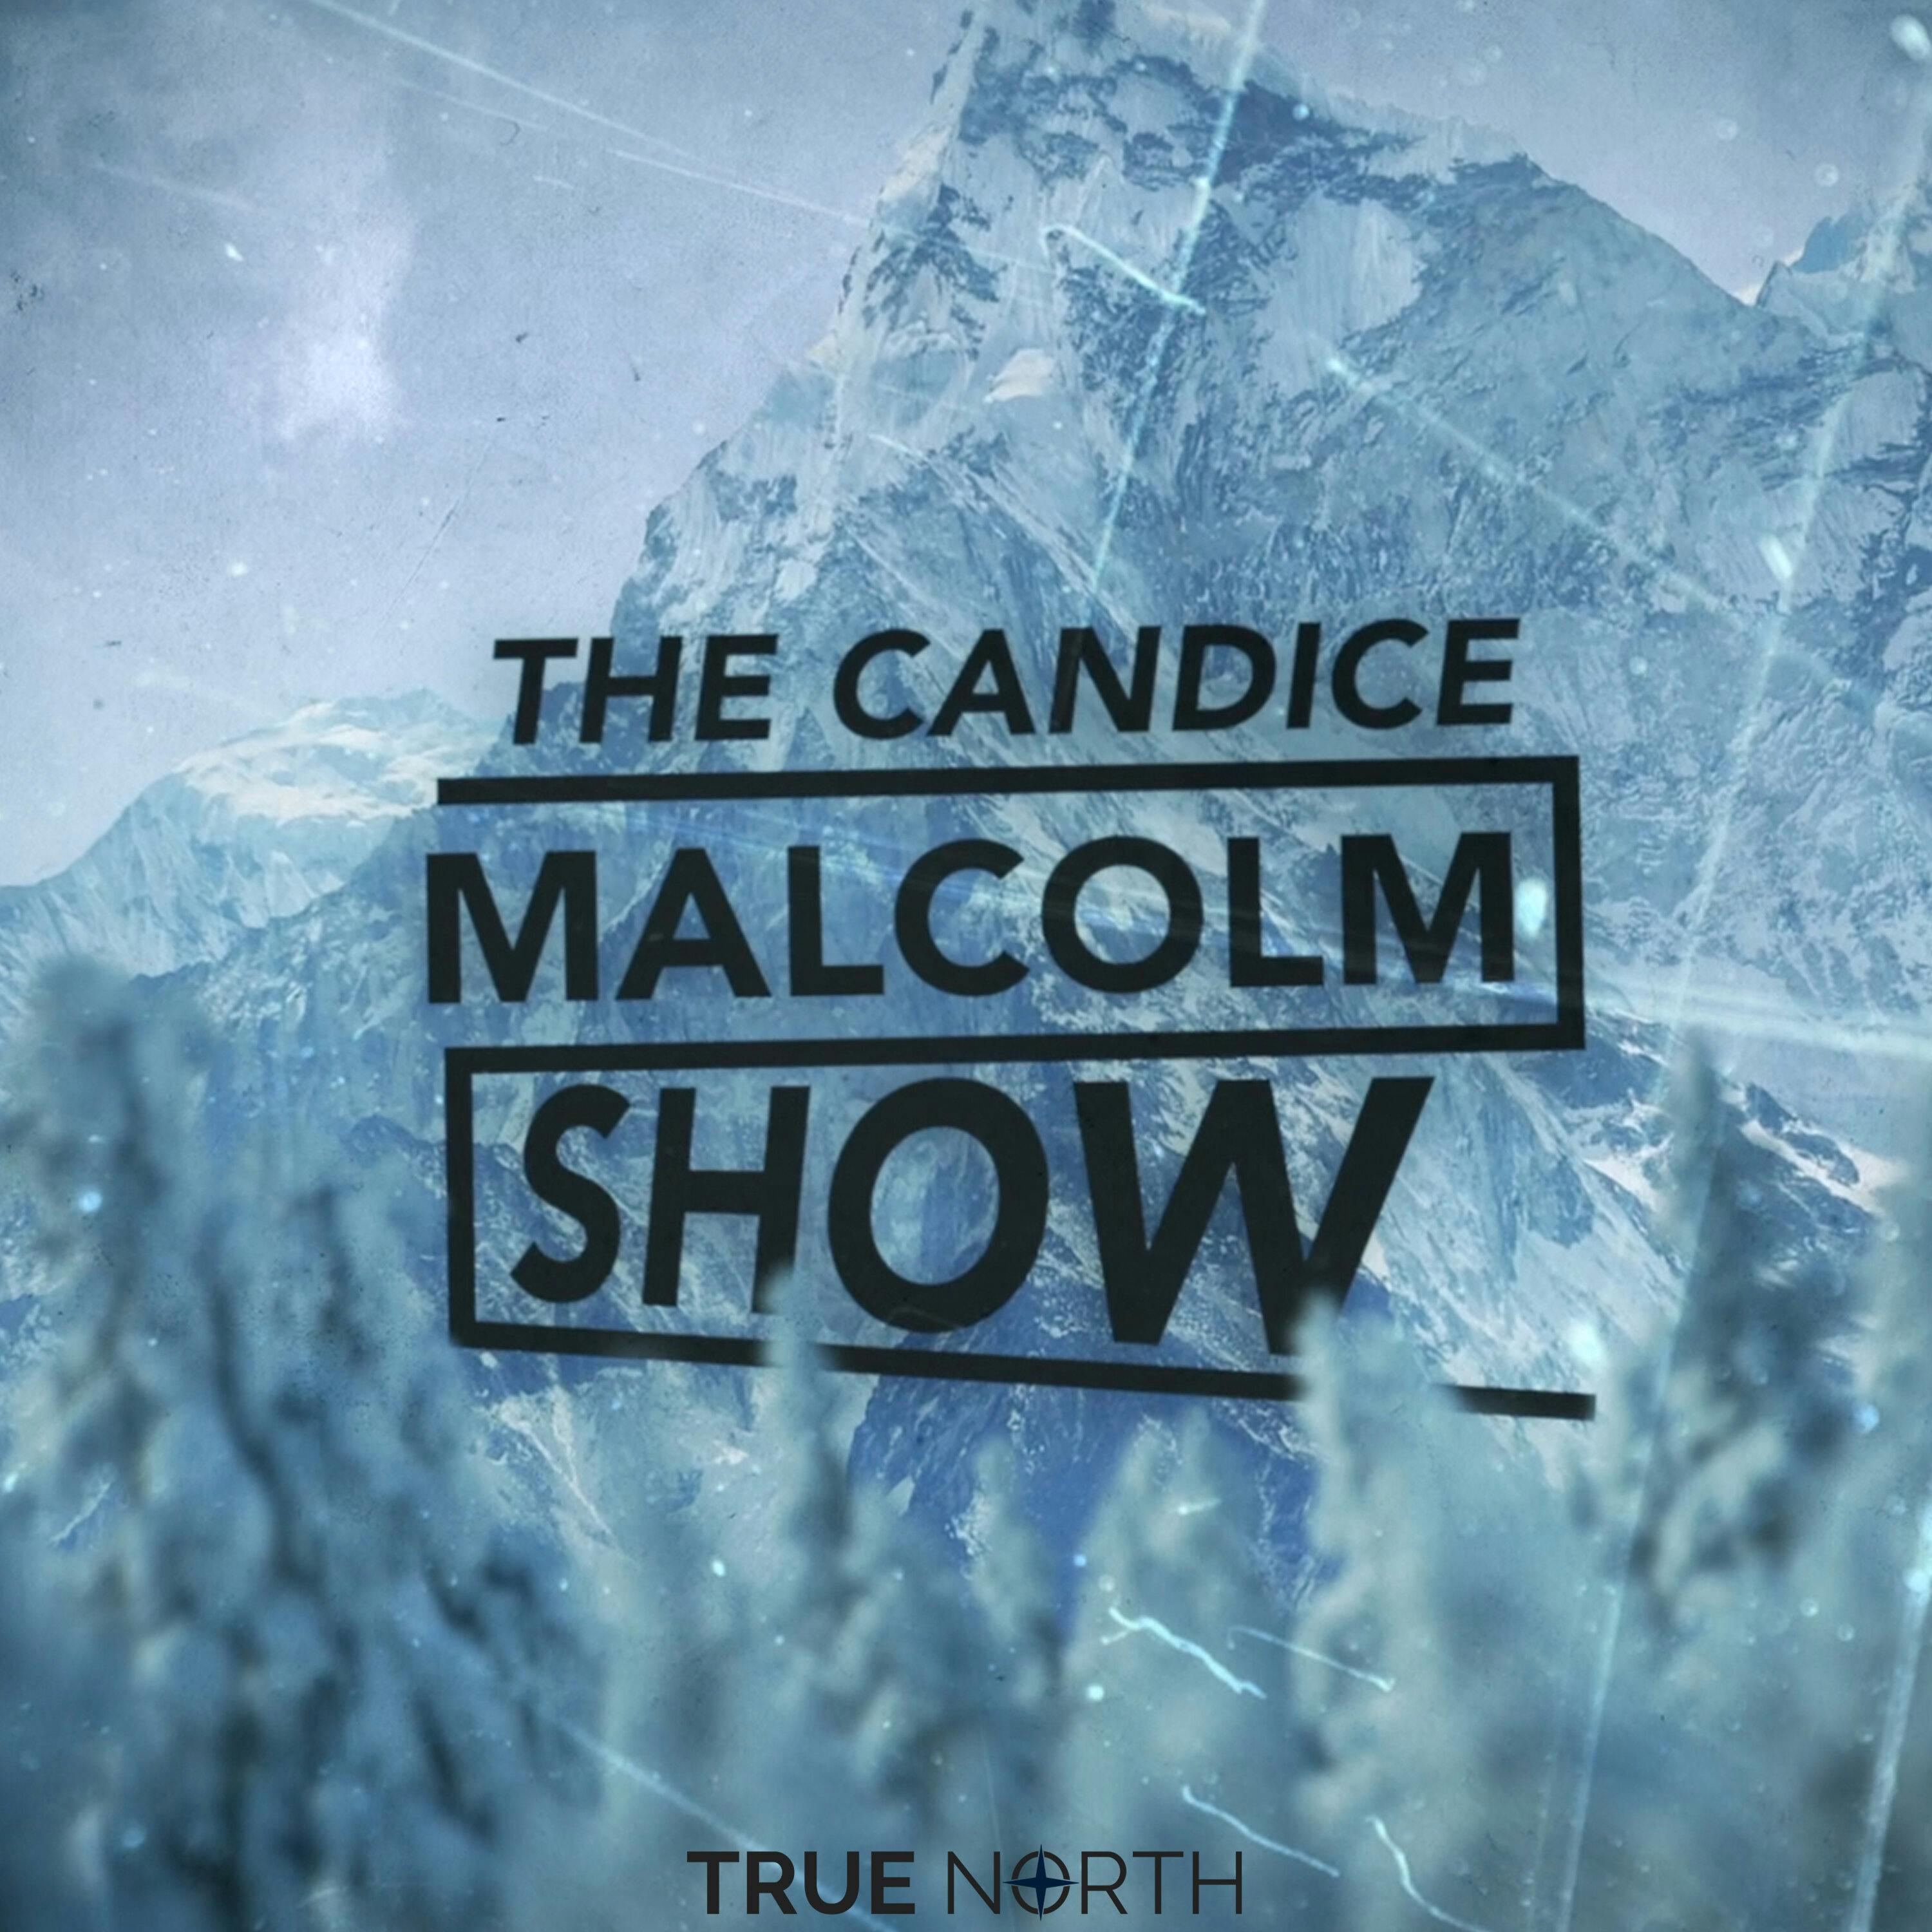 True North’s Candice Malcolm to moderate first Conservative Debate on May 5th